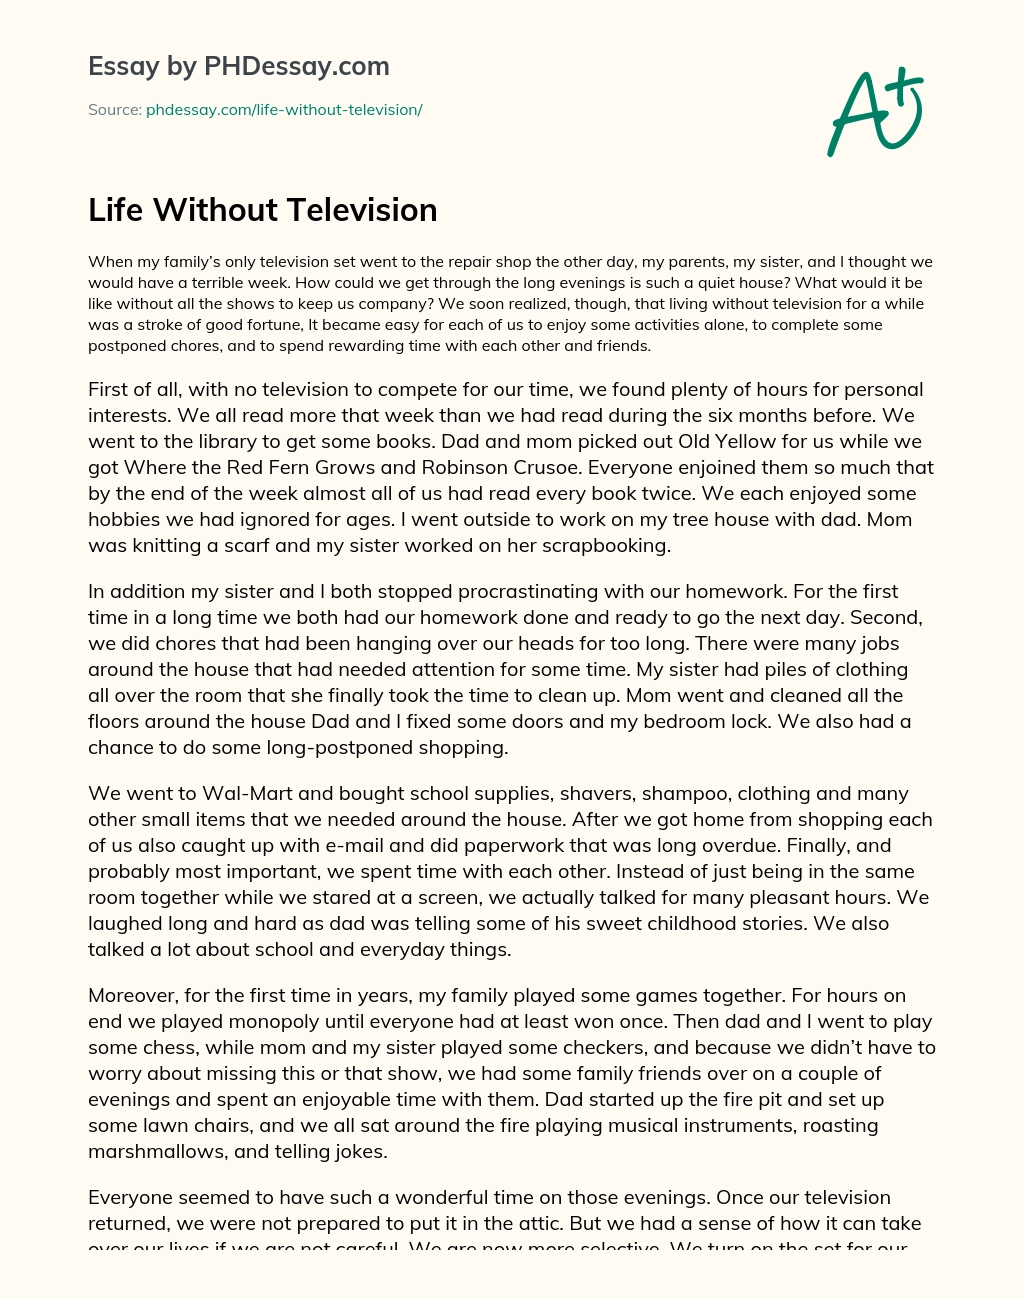 Life Without Television essay